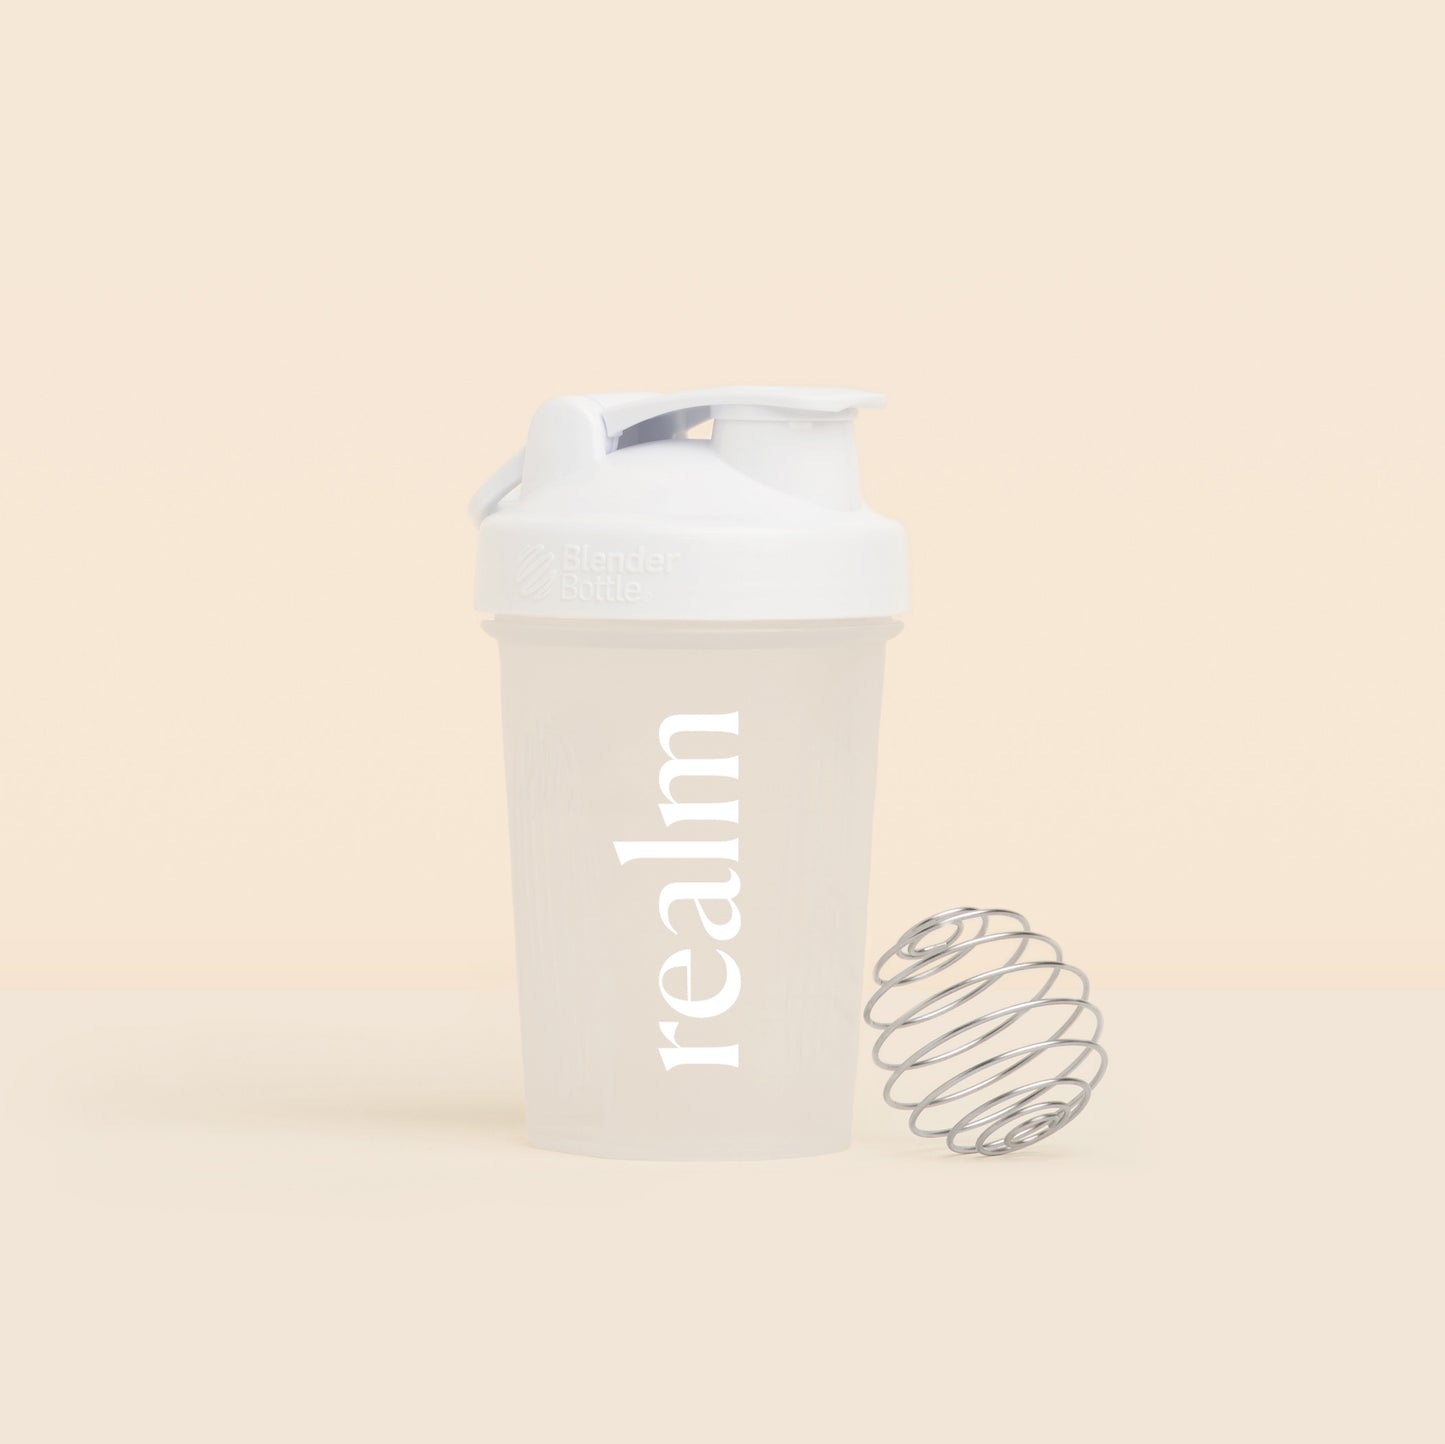 Realm Shaker "Classic"